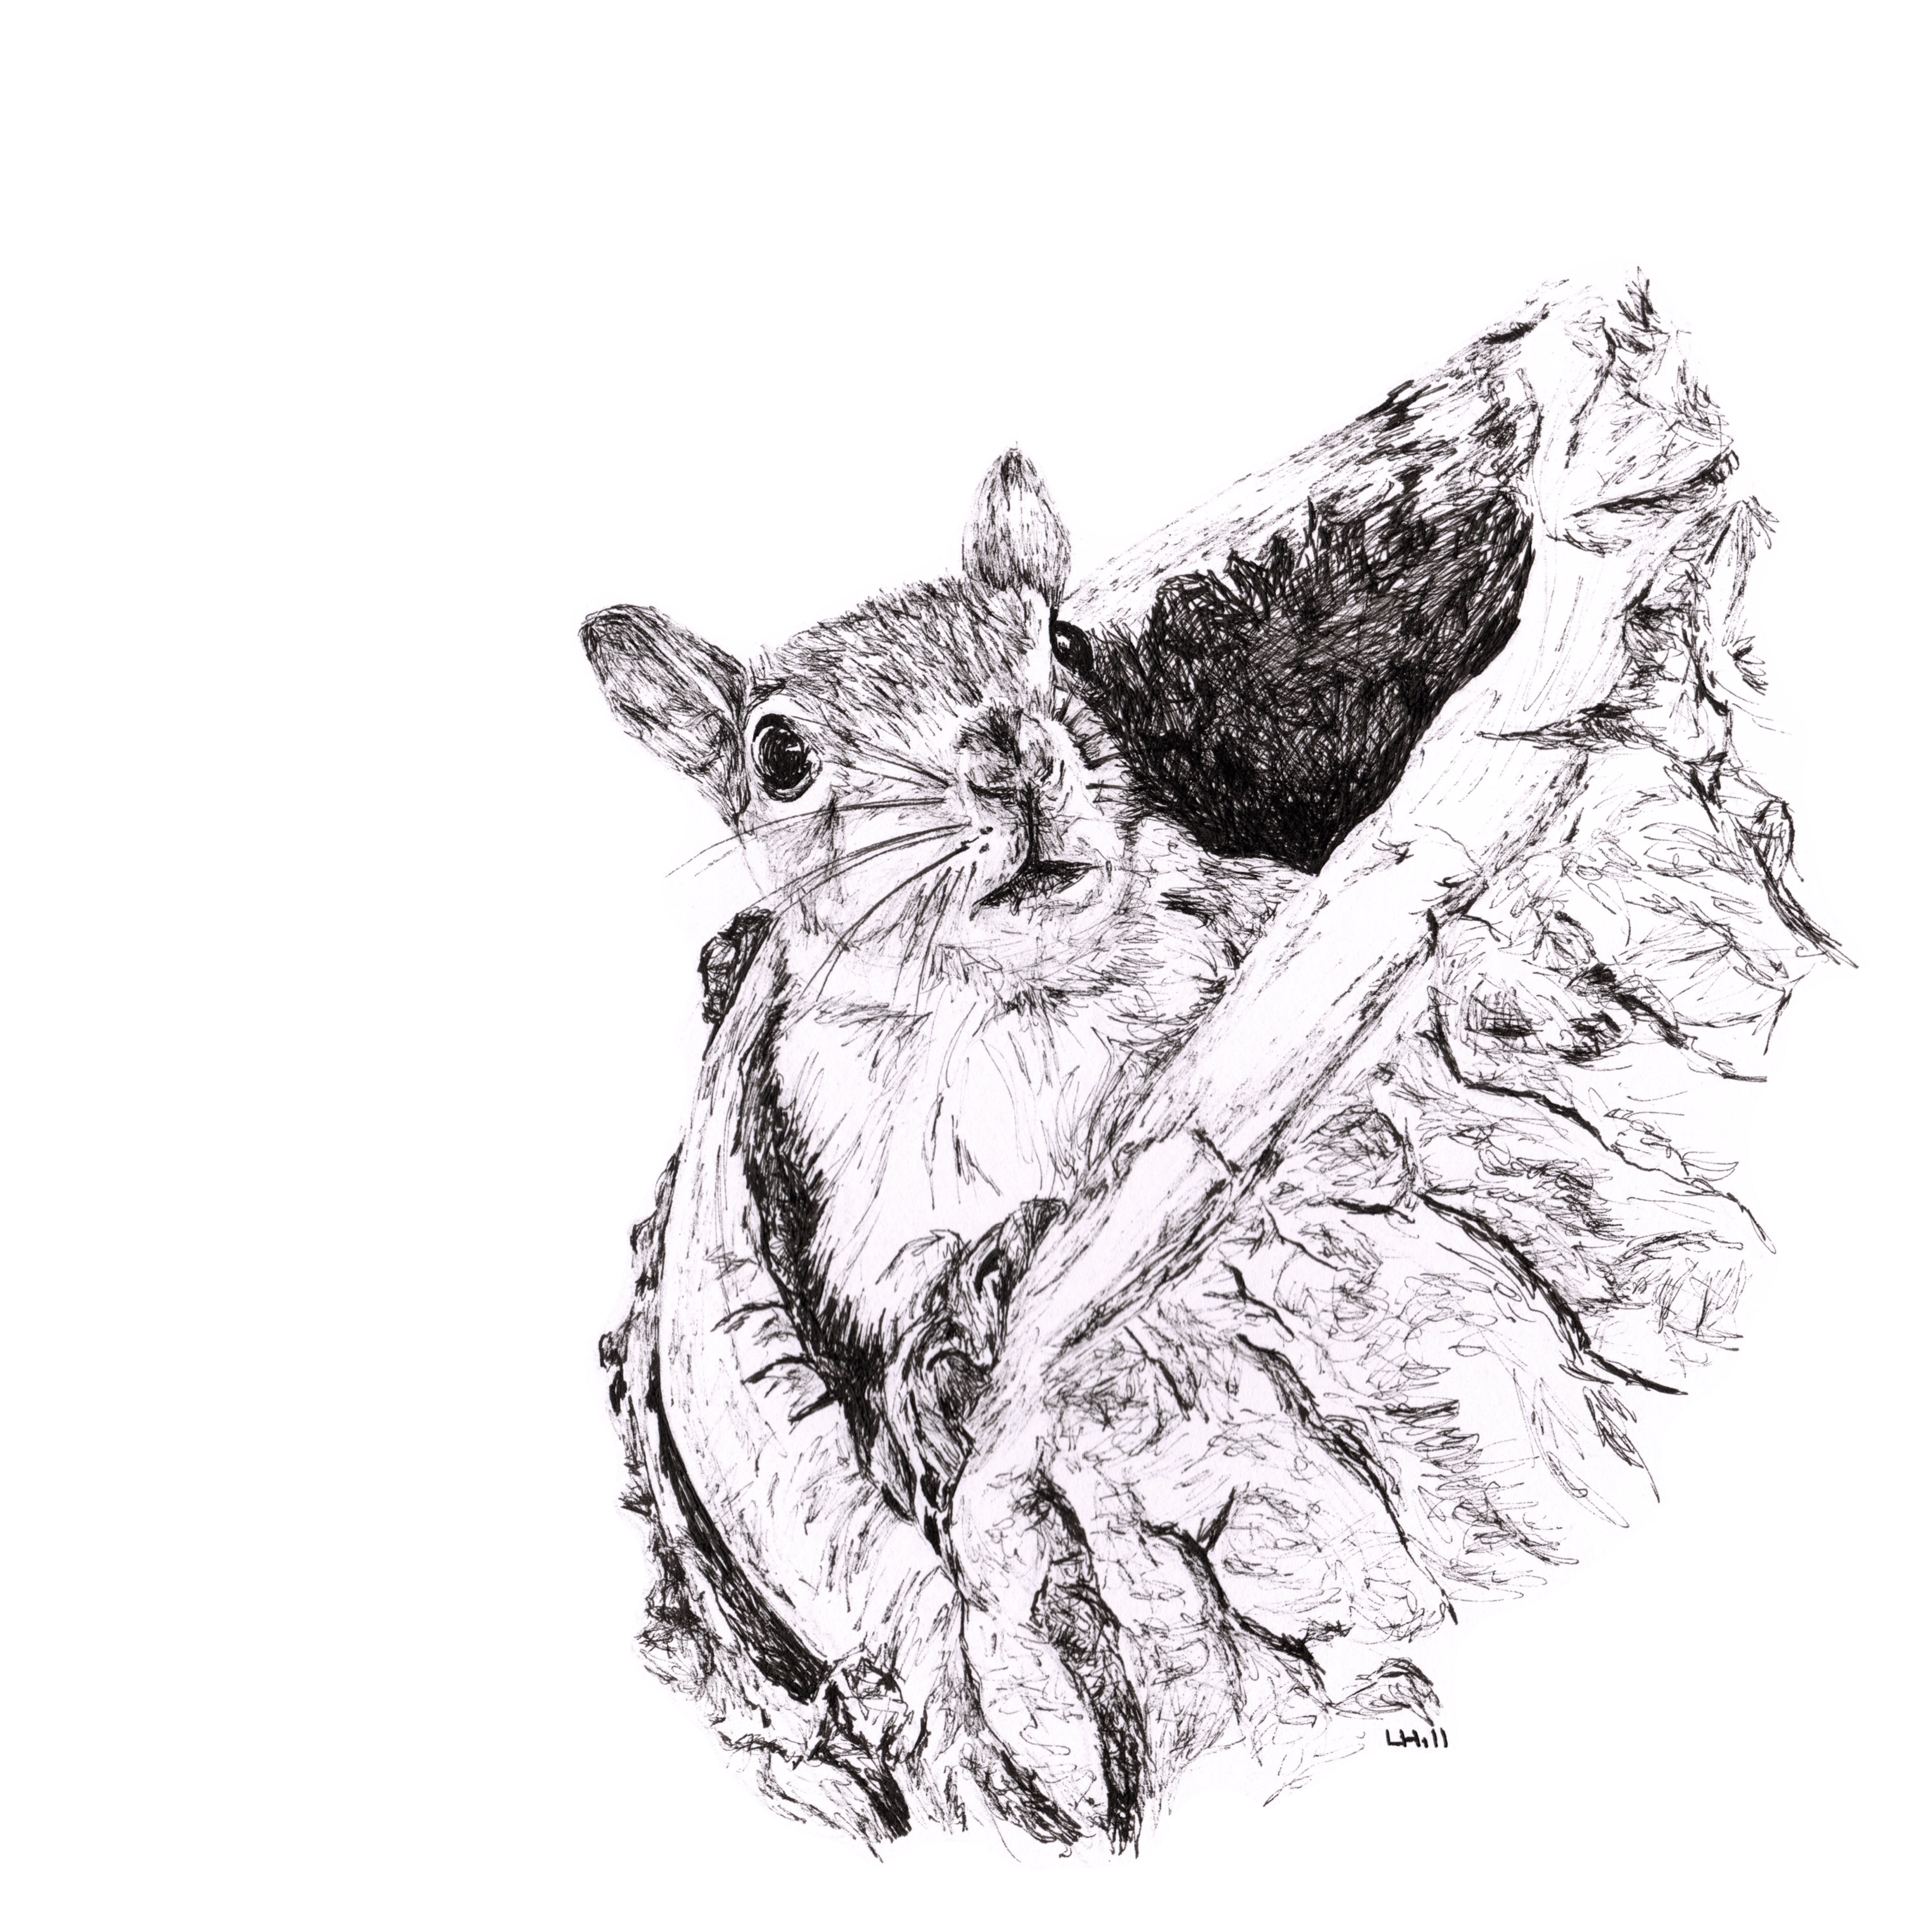 Squirrel in a Tree pen and ink illustration by Louisa Hill